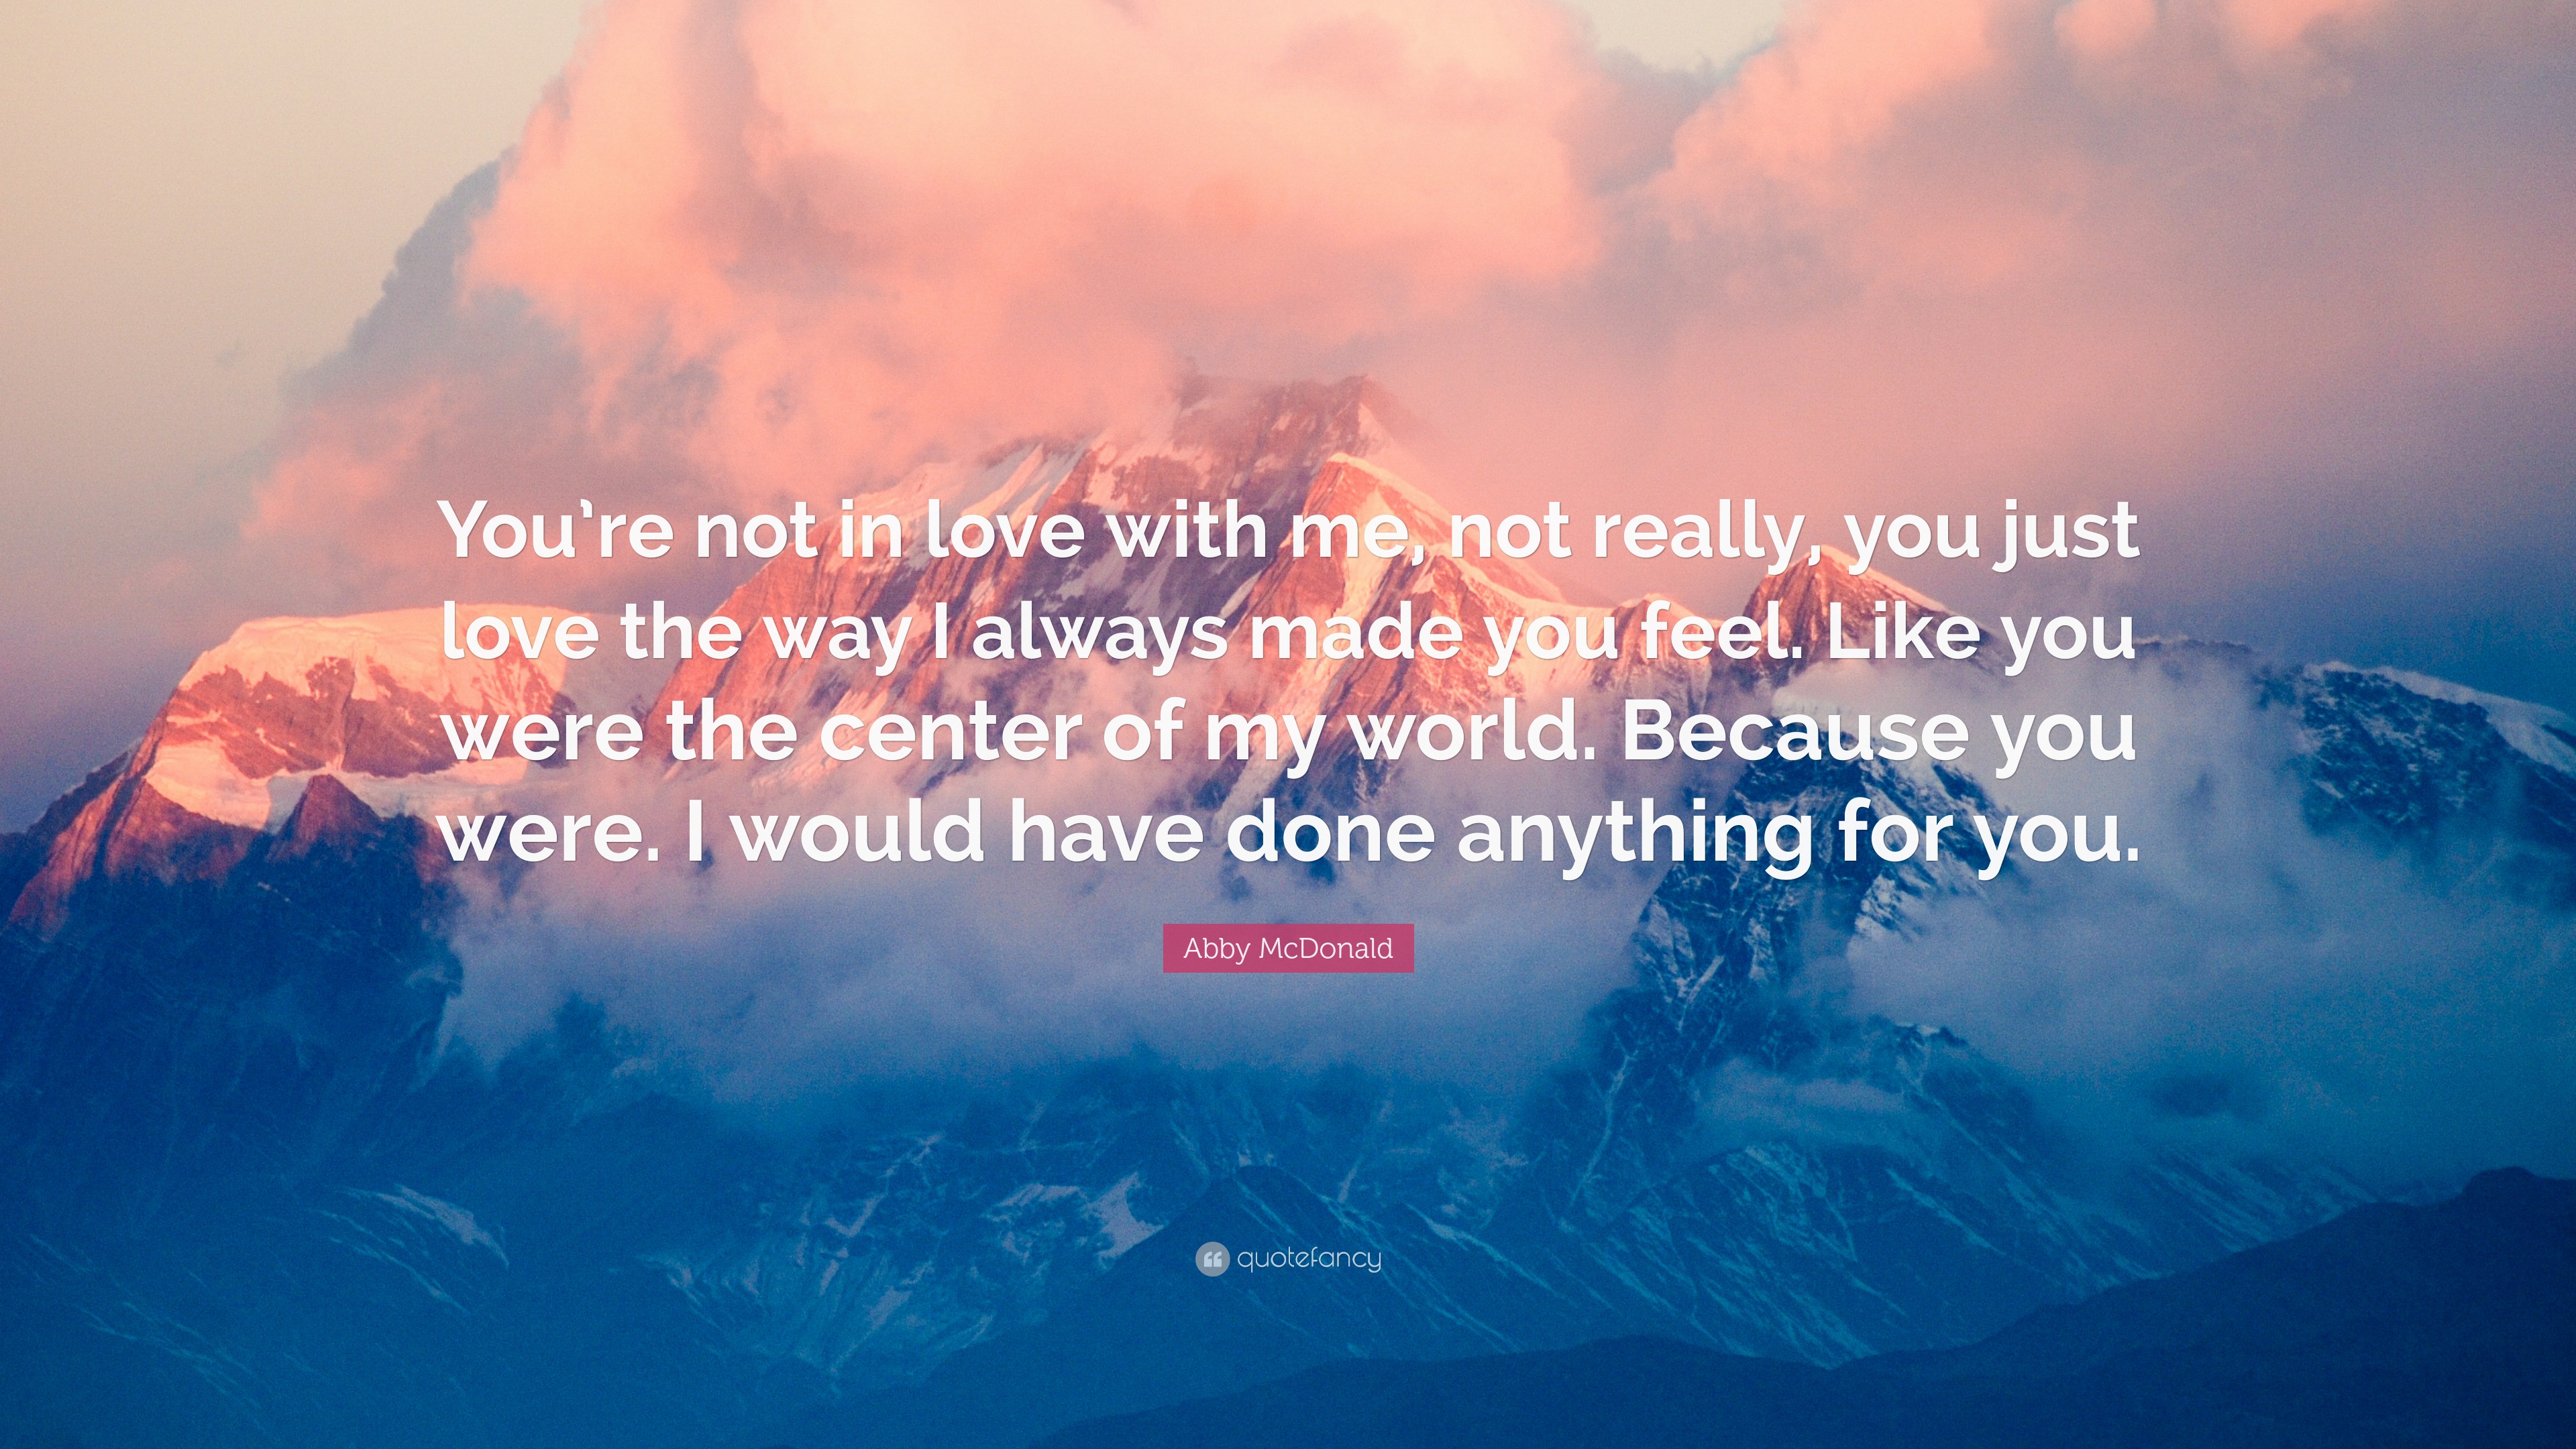 Abby McDonald Quote: “You’re not in love with me, not really, you just ...